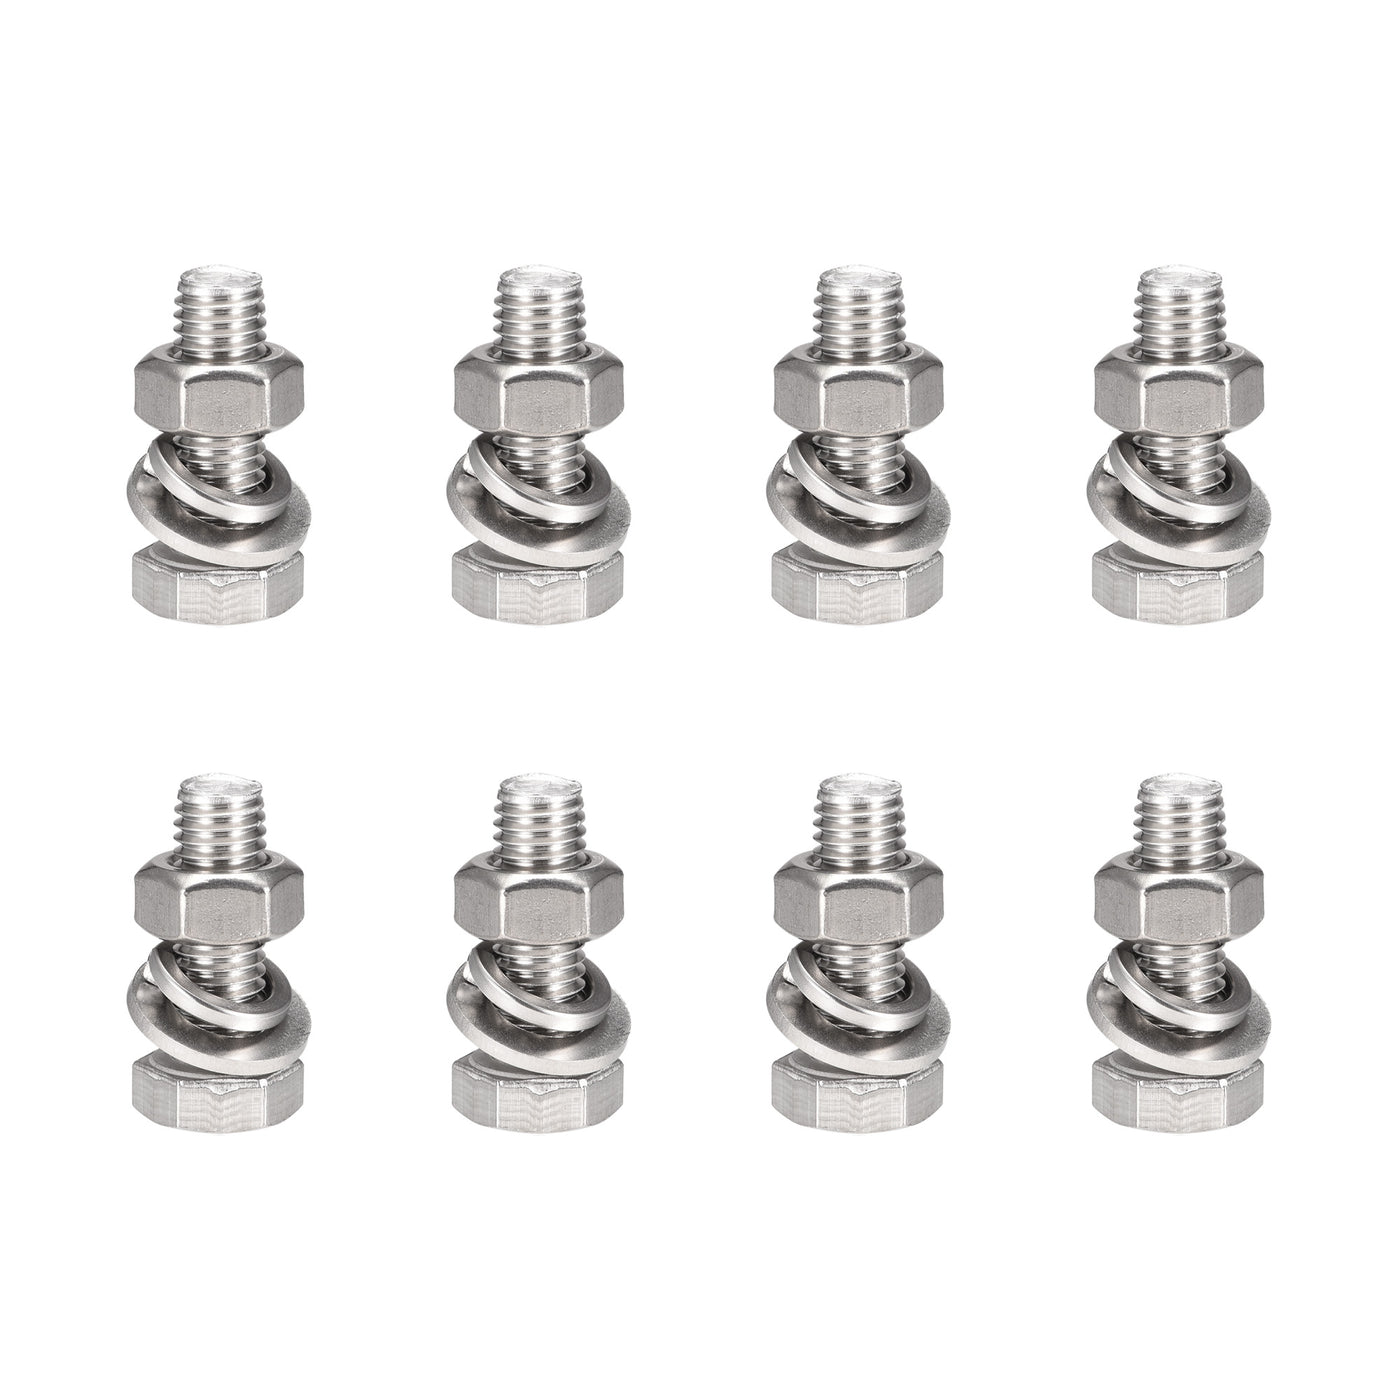 Uxcell Uxcell M10 x 35mm Hex Head Screws Bolts, Nuts, Flat & Lock Washers Kits, 304 Stainless Steel Fully Thread Hexagon Bolts 8 Sets